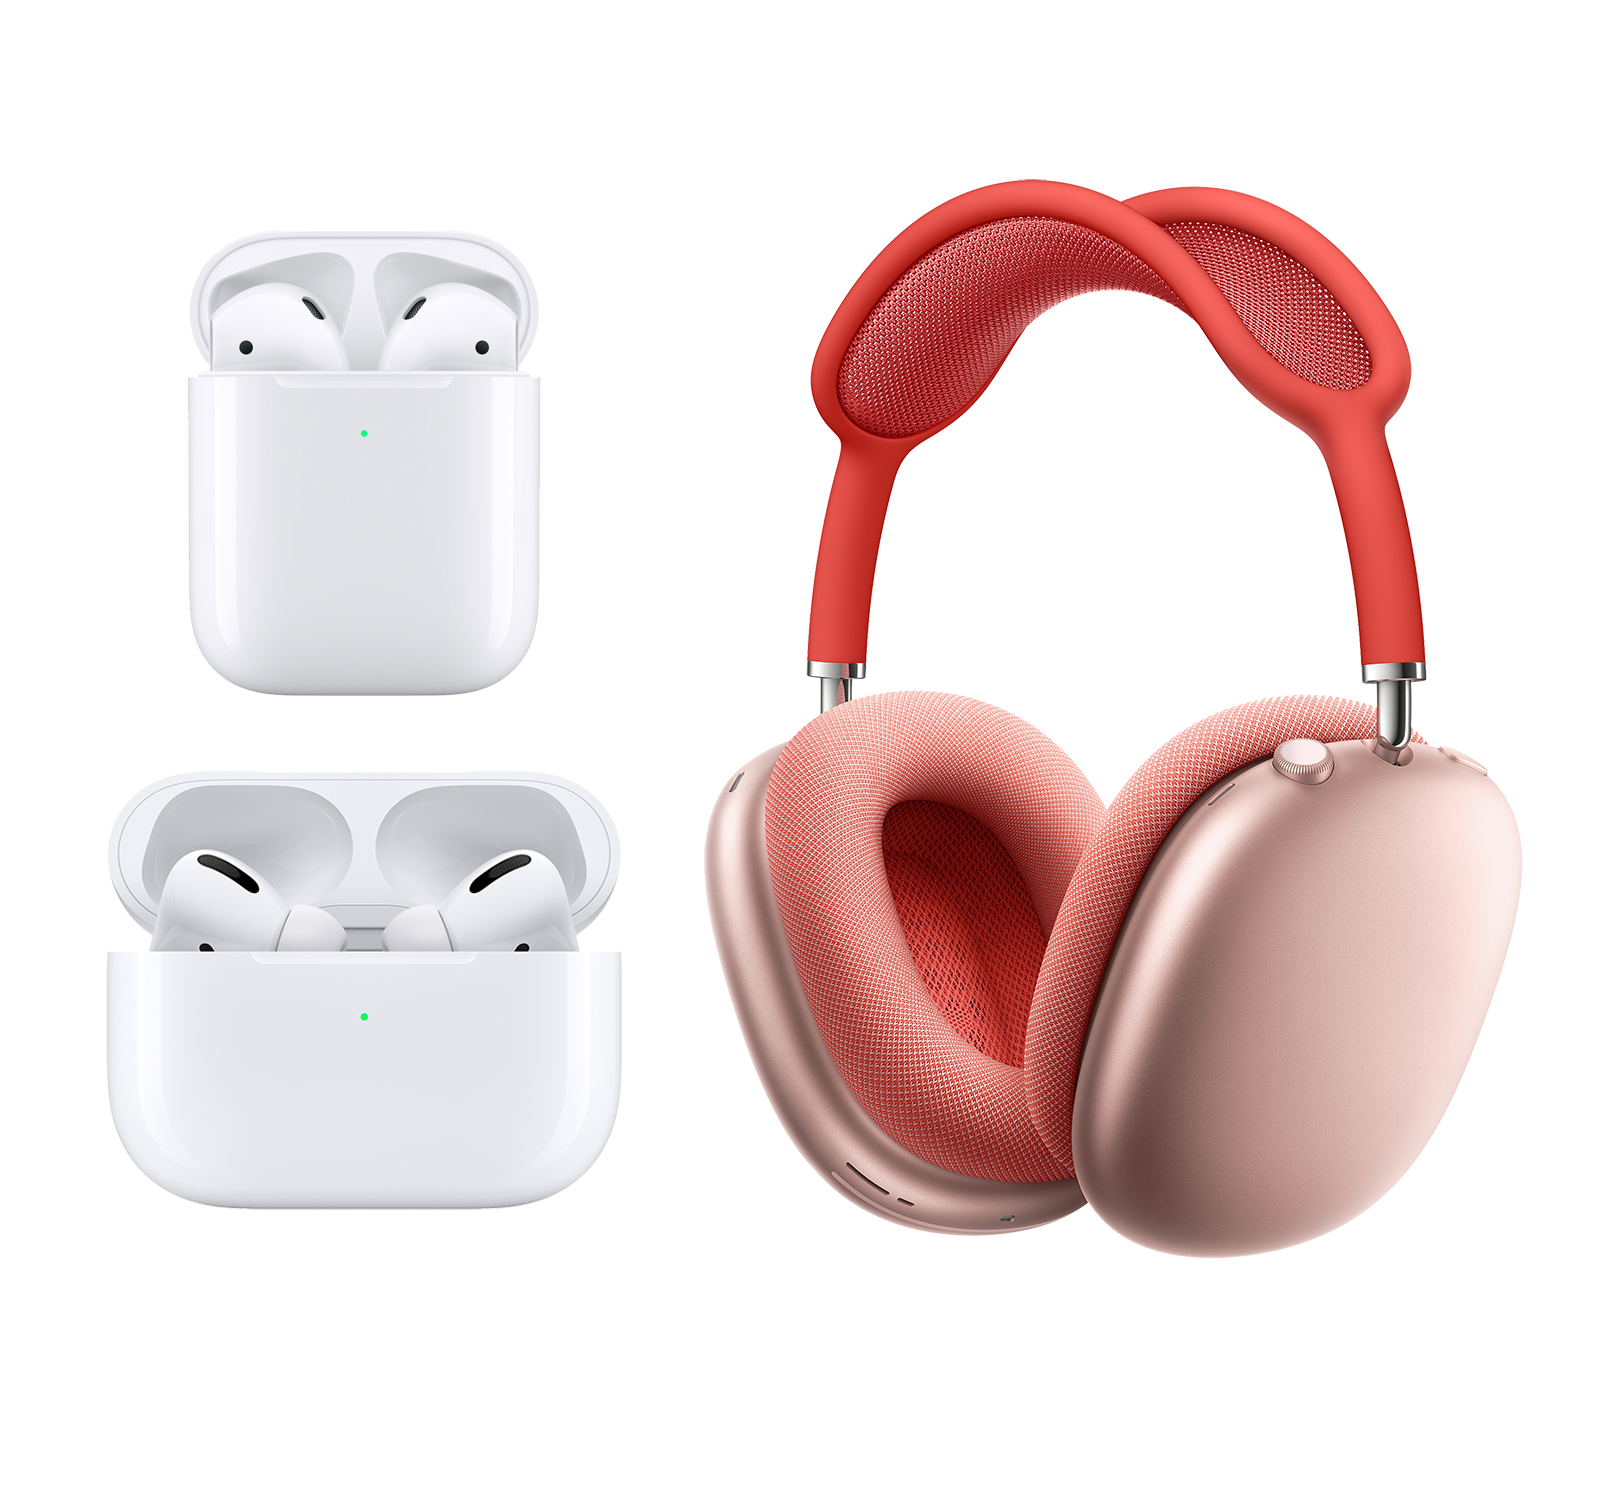 Apple AirPods 2 MQD83AM/A | Features, Specs, Best Prices